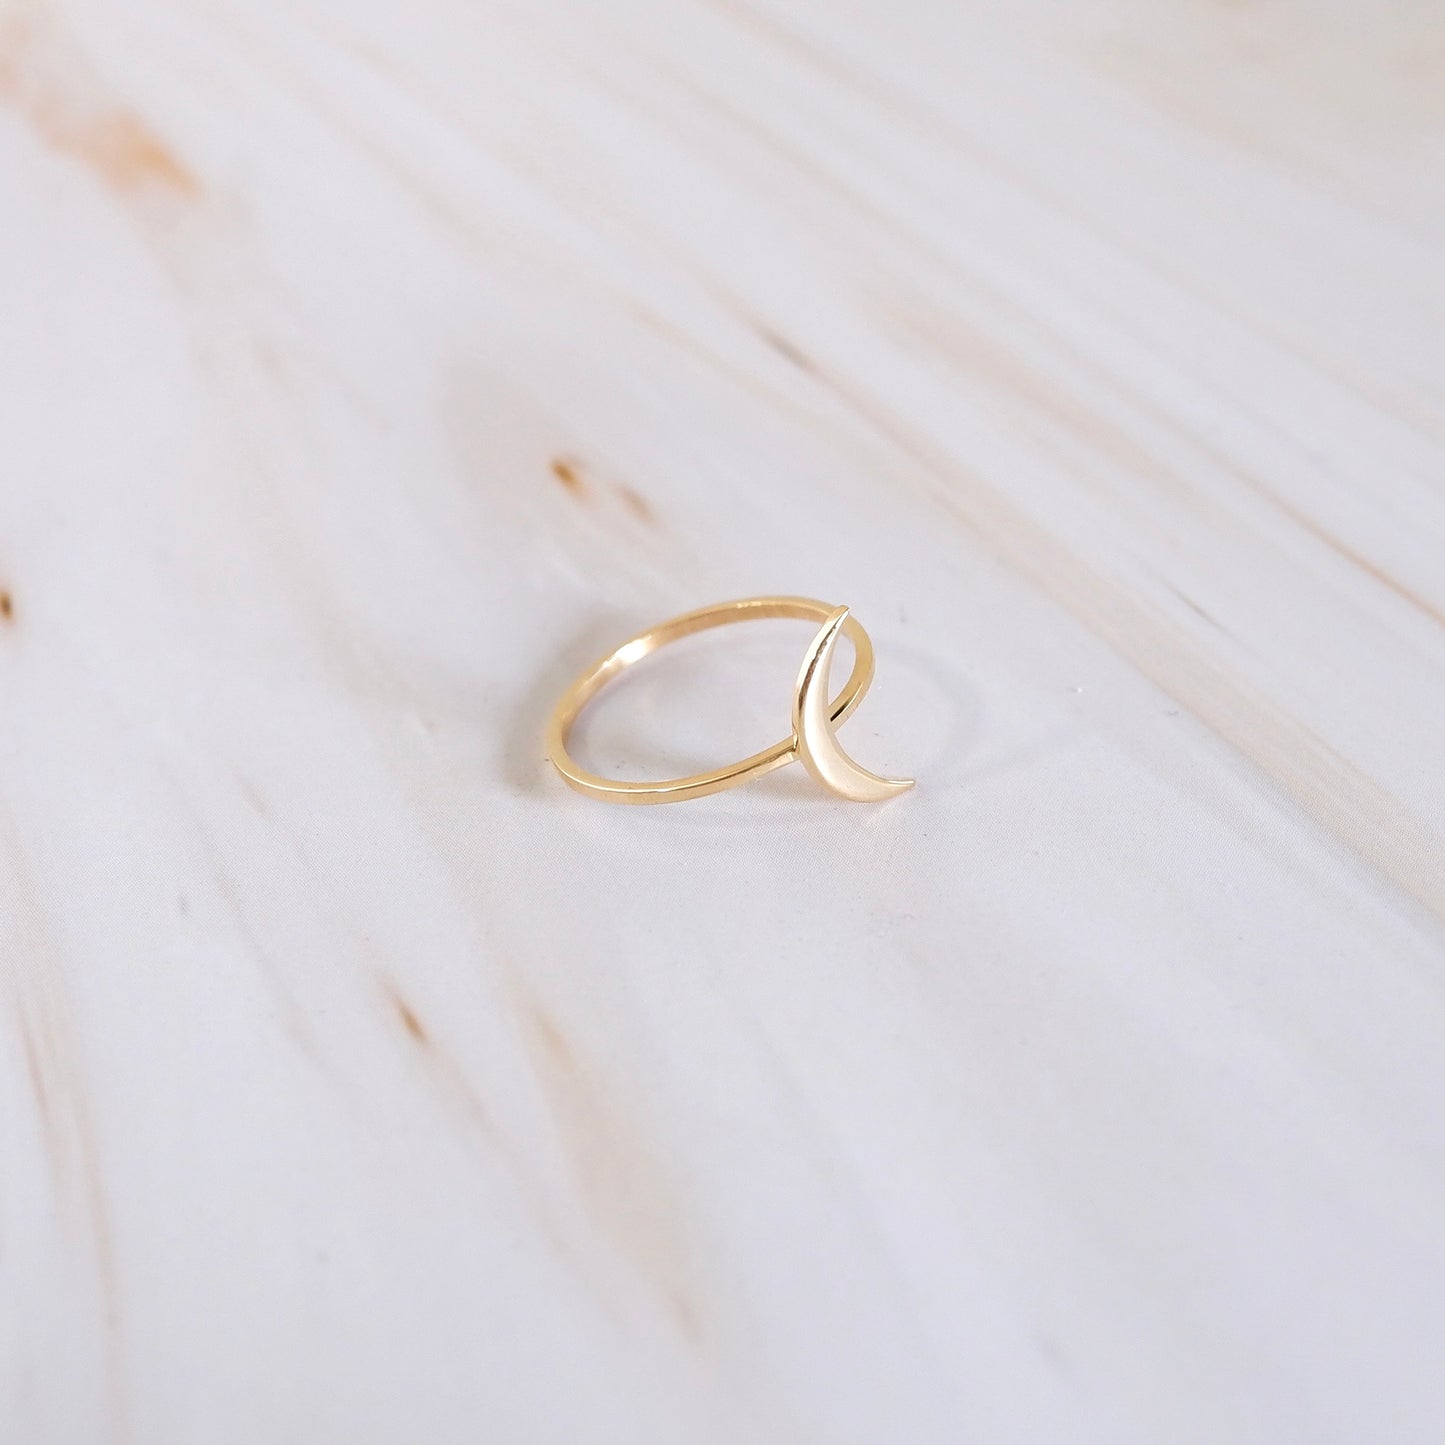 The Minimal Moon Ring in Solid Gold